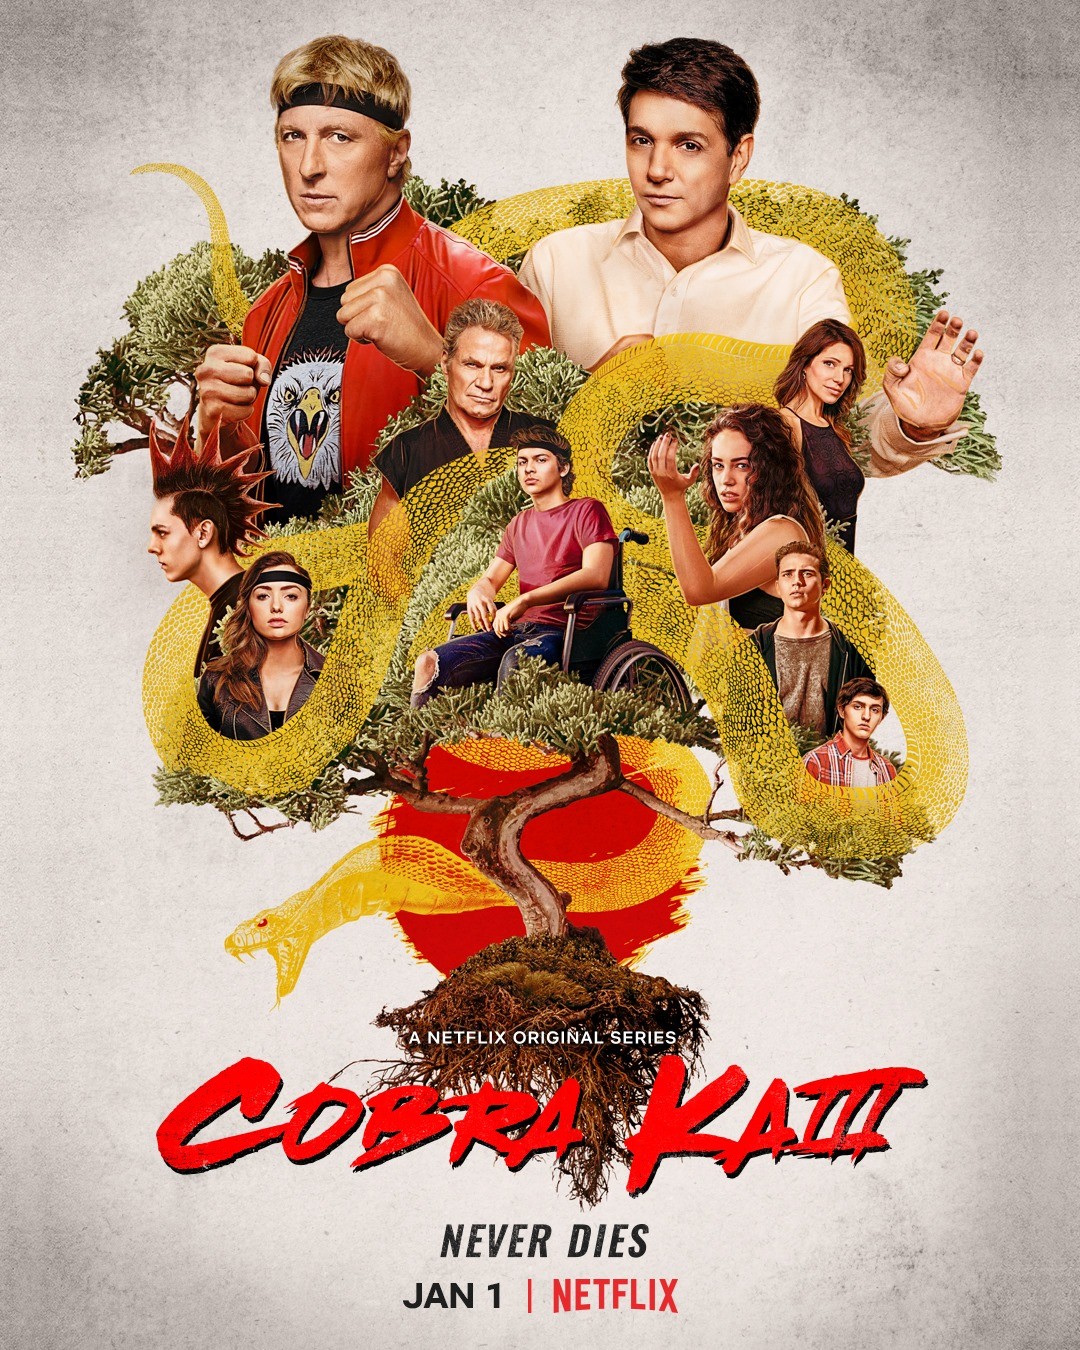 Cobra Kai Never Dies: Season 6 Almost Certainly Won't Be The End